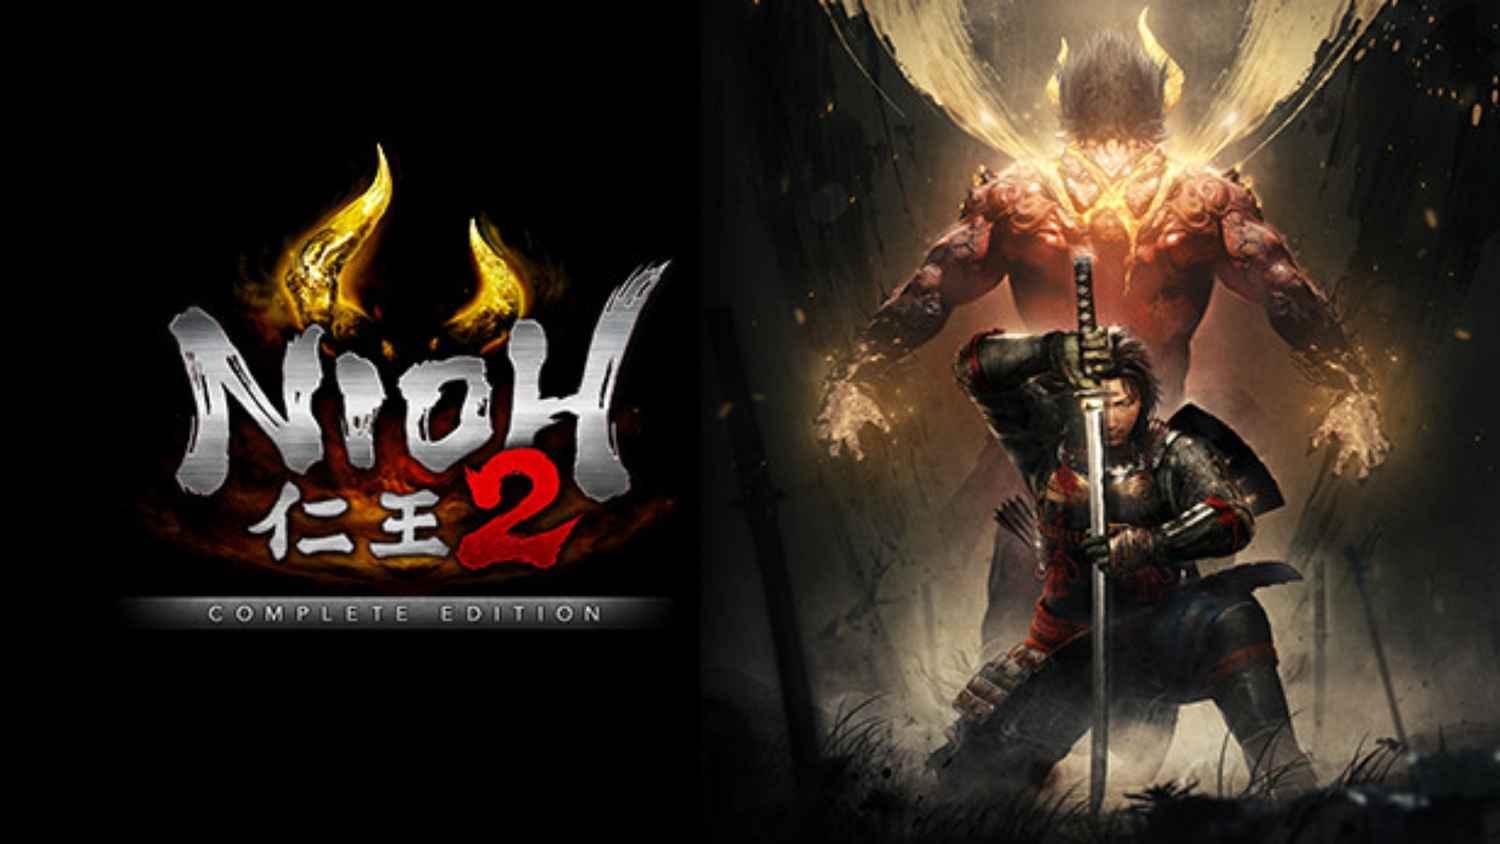 Grab Nioh 2: Special Edition (PS4) at 80% discount: Check out the details here | Digit